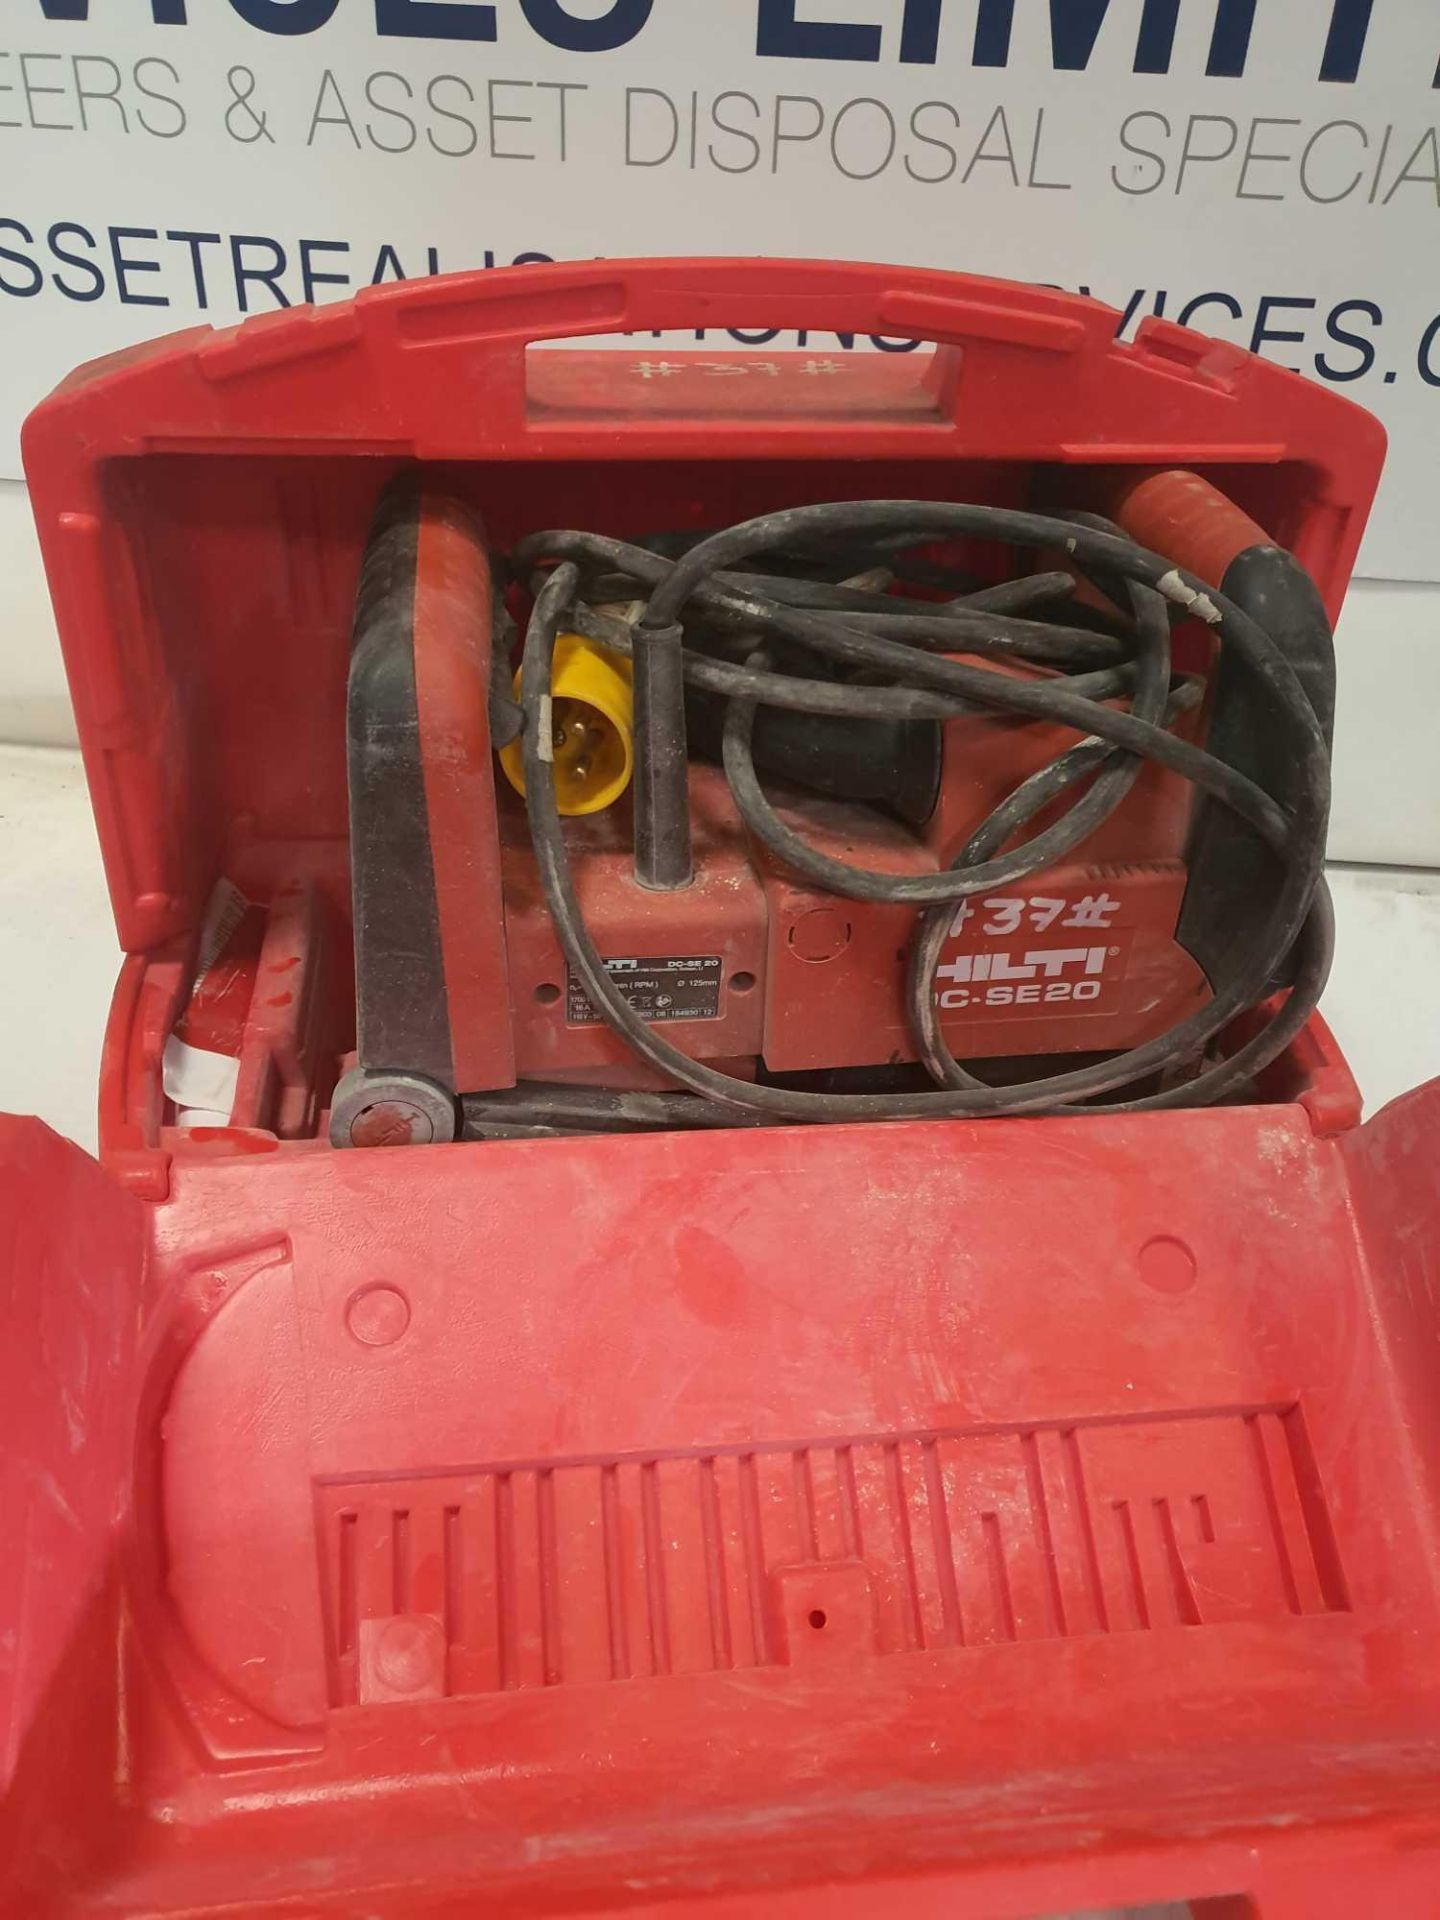 Hilti wall chaser 110v - Image 2 of 4